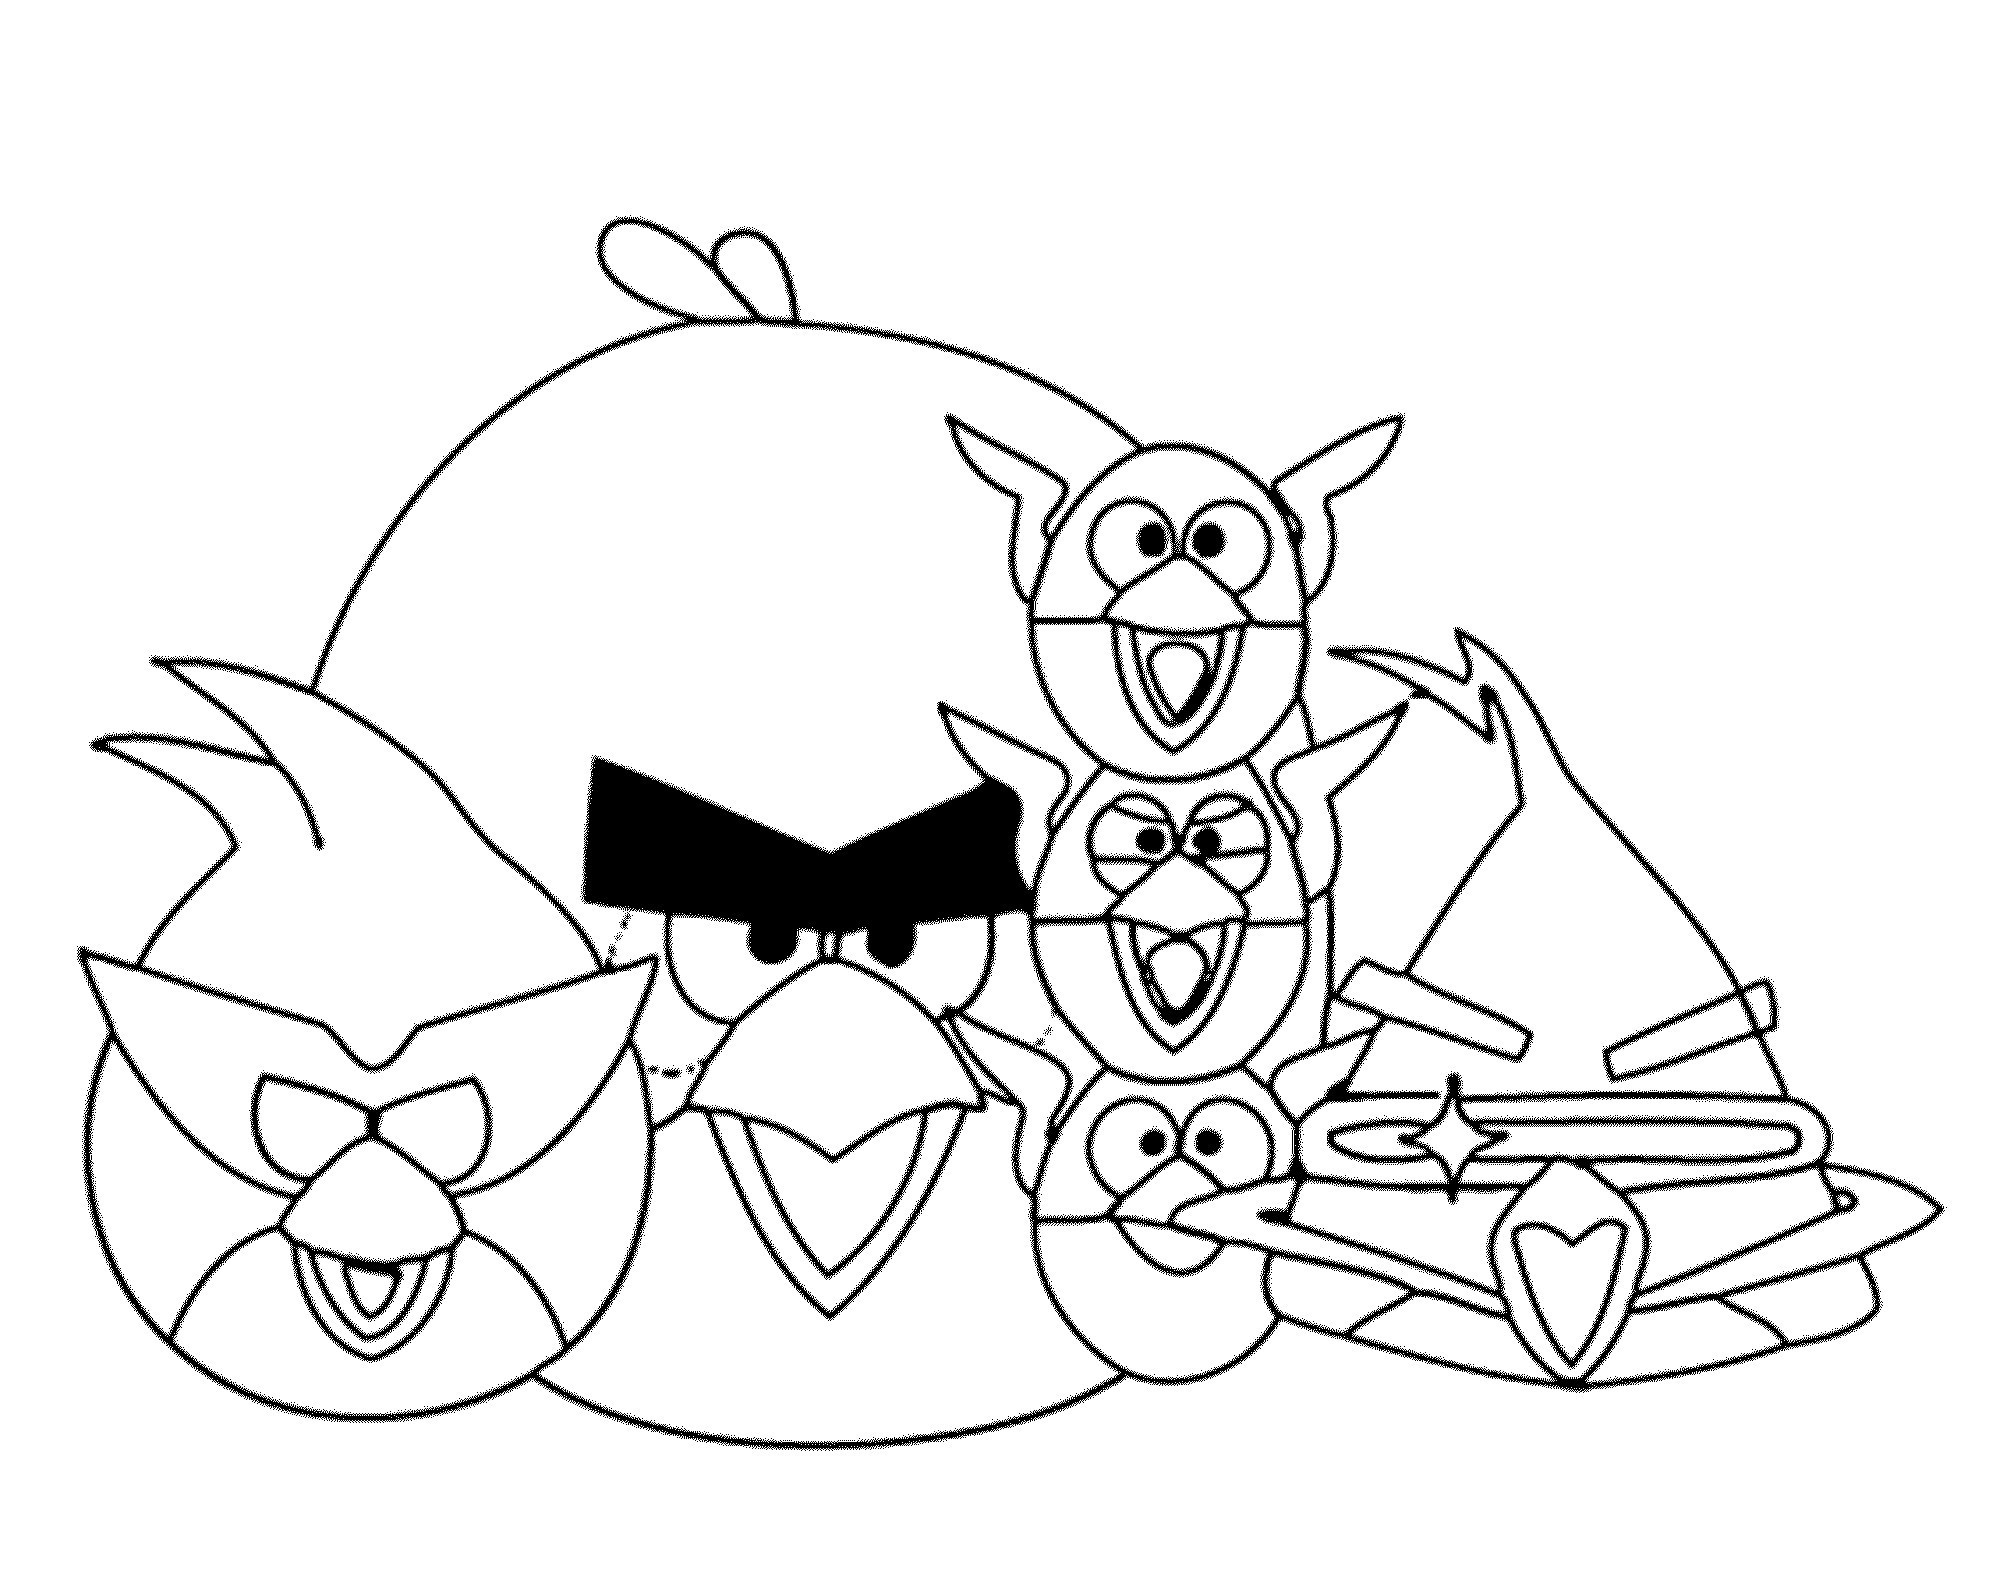 Angry Birds Star Wars Coloring Pages Pdf Unique Angry Birds Coloring Pages Cool Coloring Pages